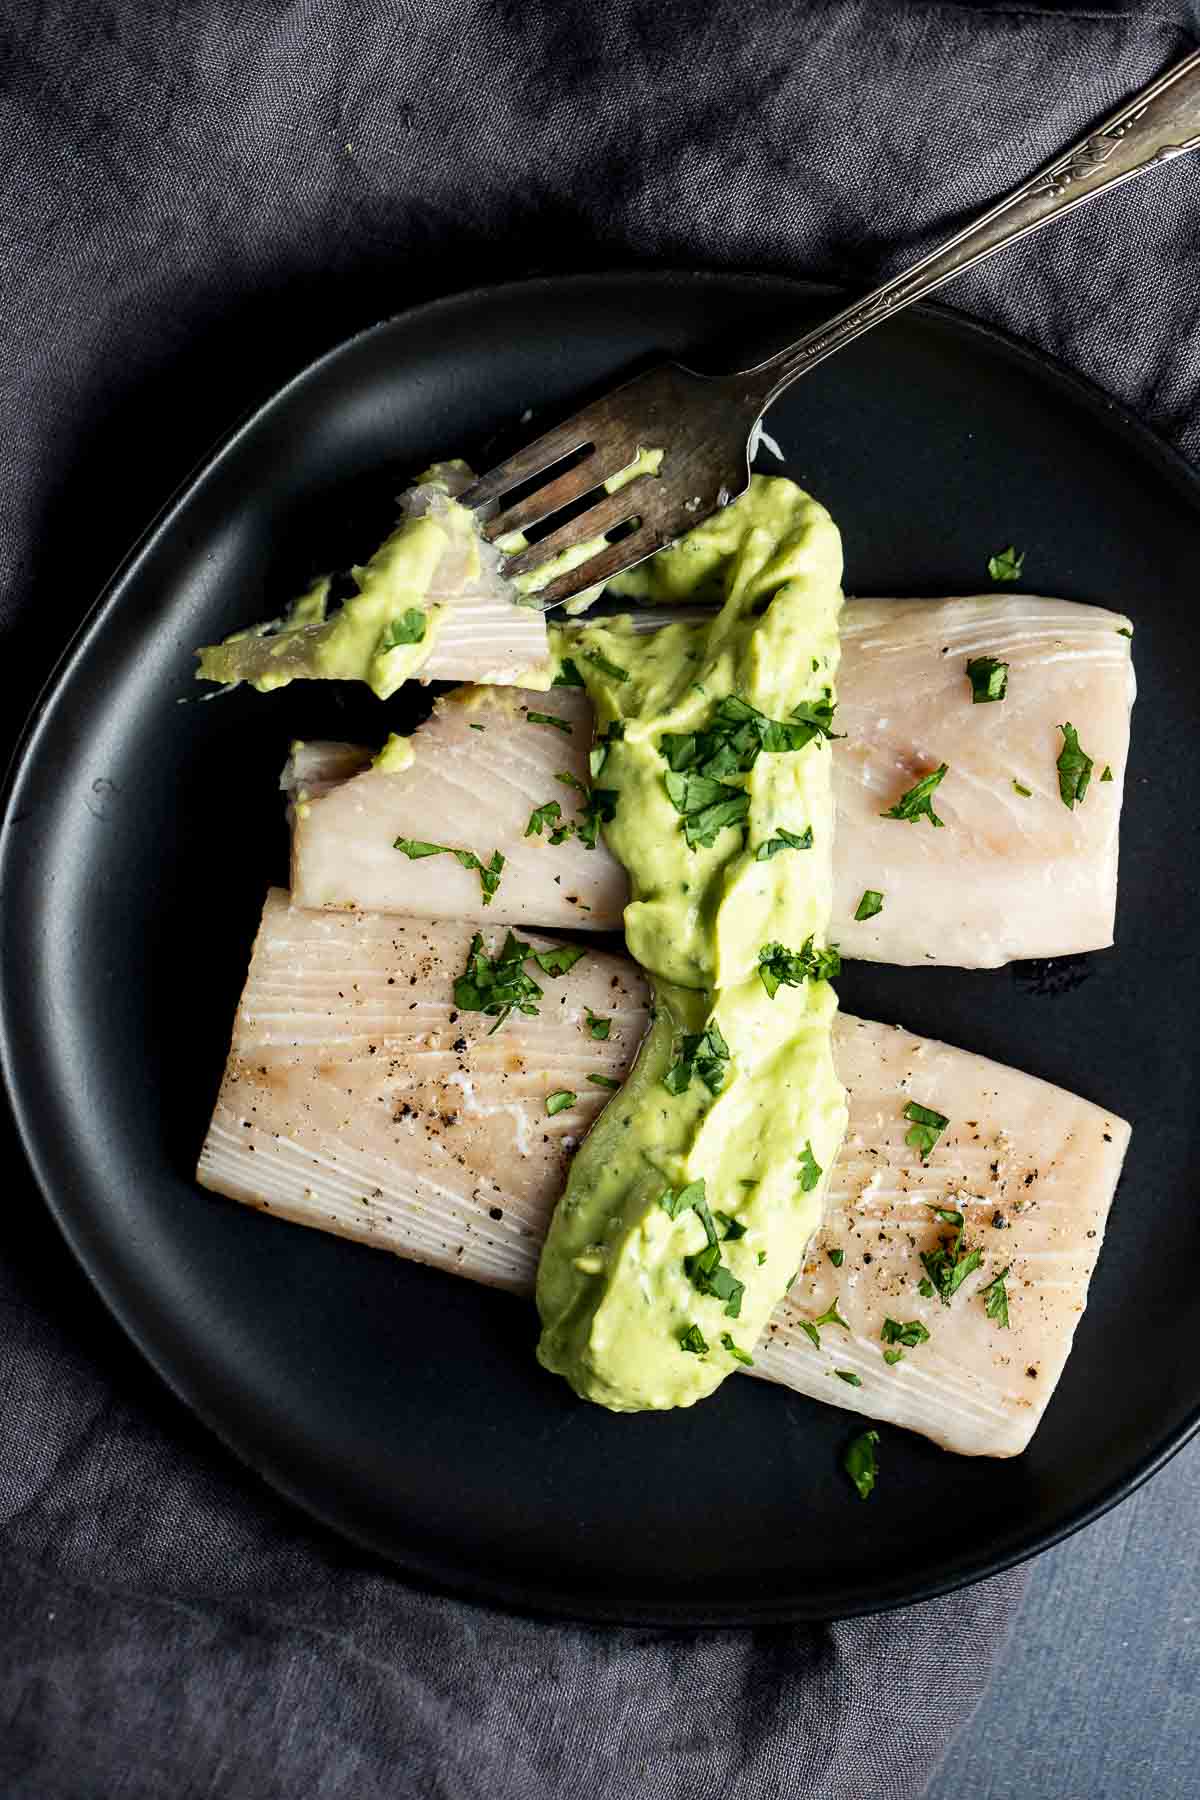 Overhead view of two fillets of mahi mahi on a black plate and topped with avocado cilantro cream sauce.